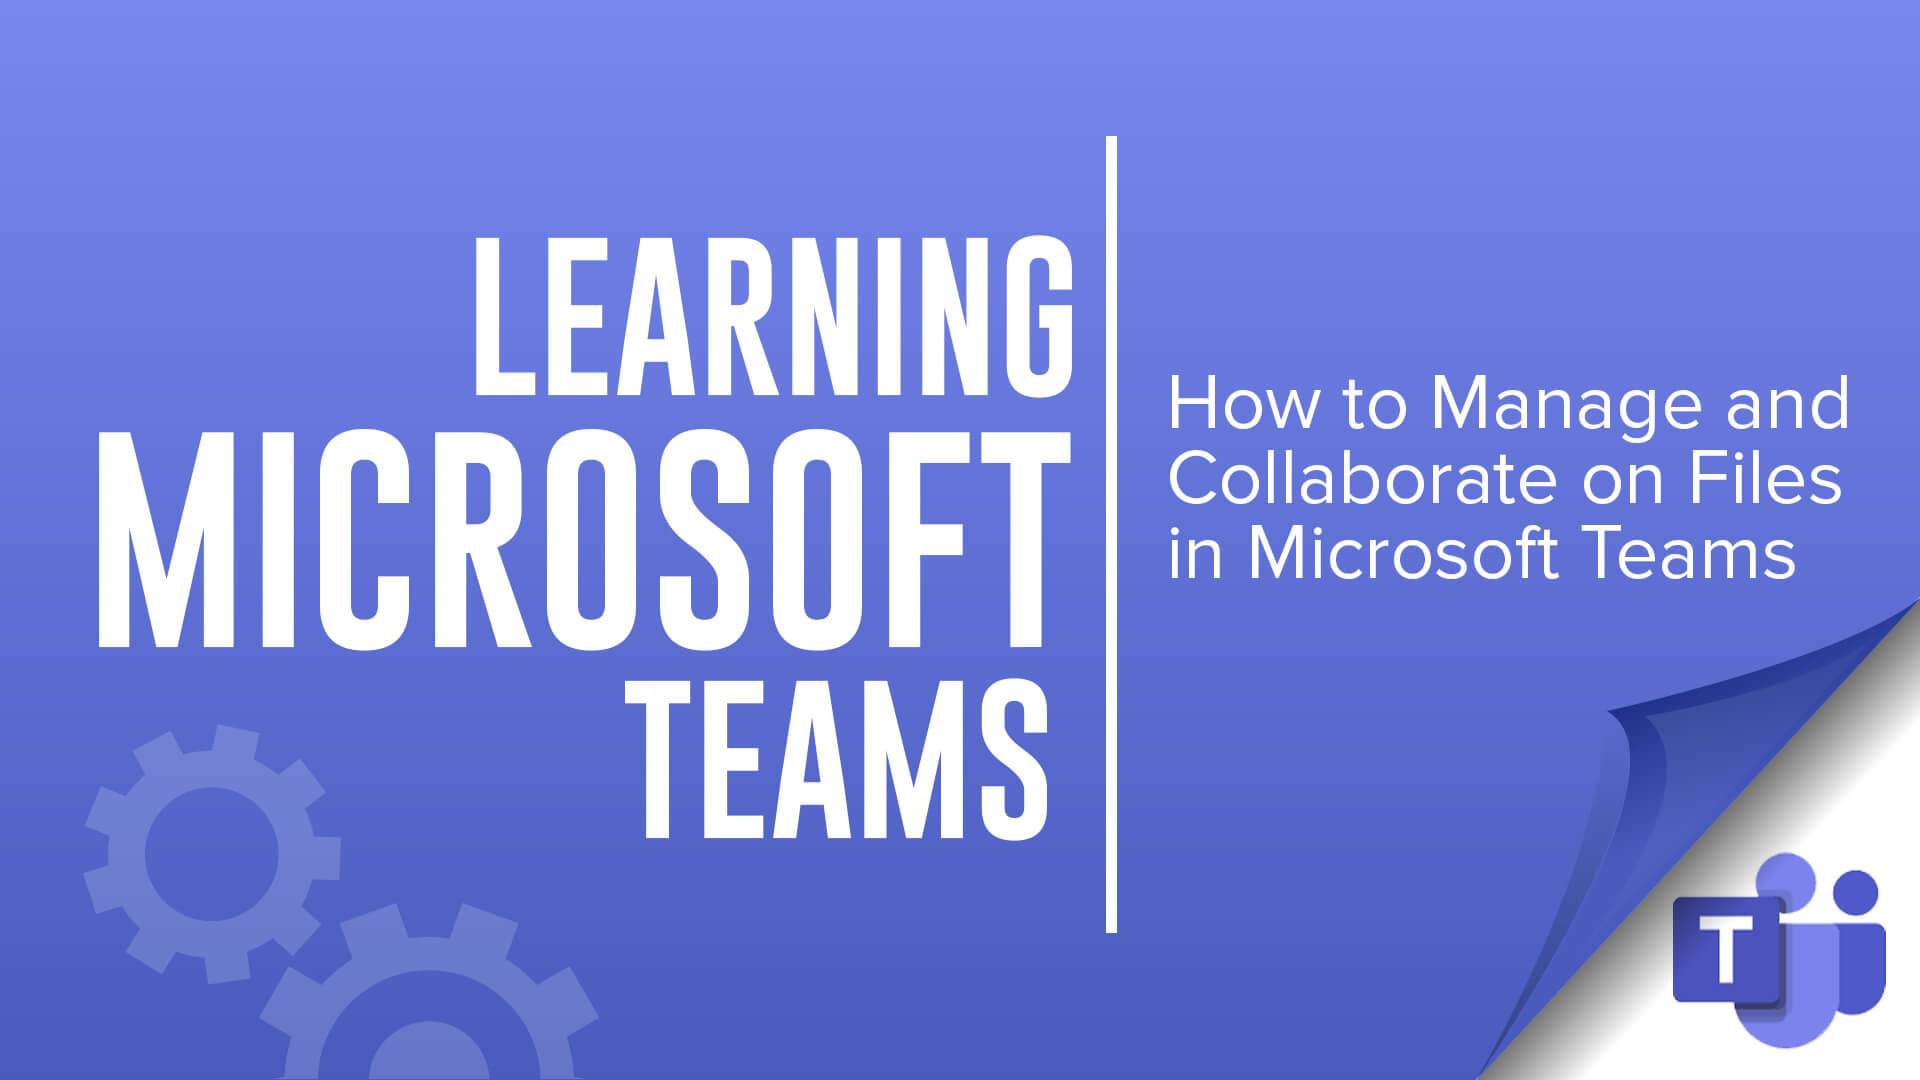 learning Microsoft Teams - How to Manage and Collaborate on Files in Microsoft Teams